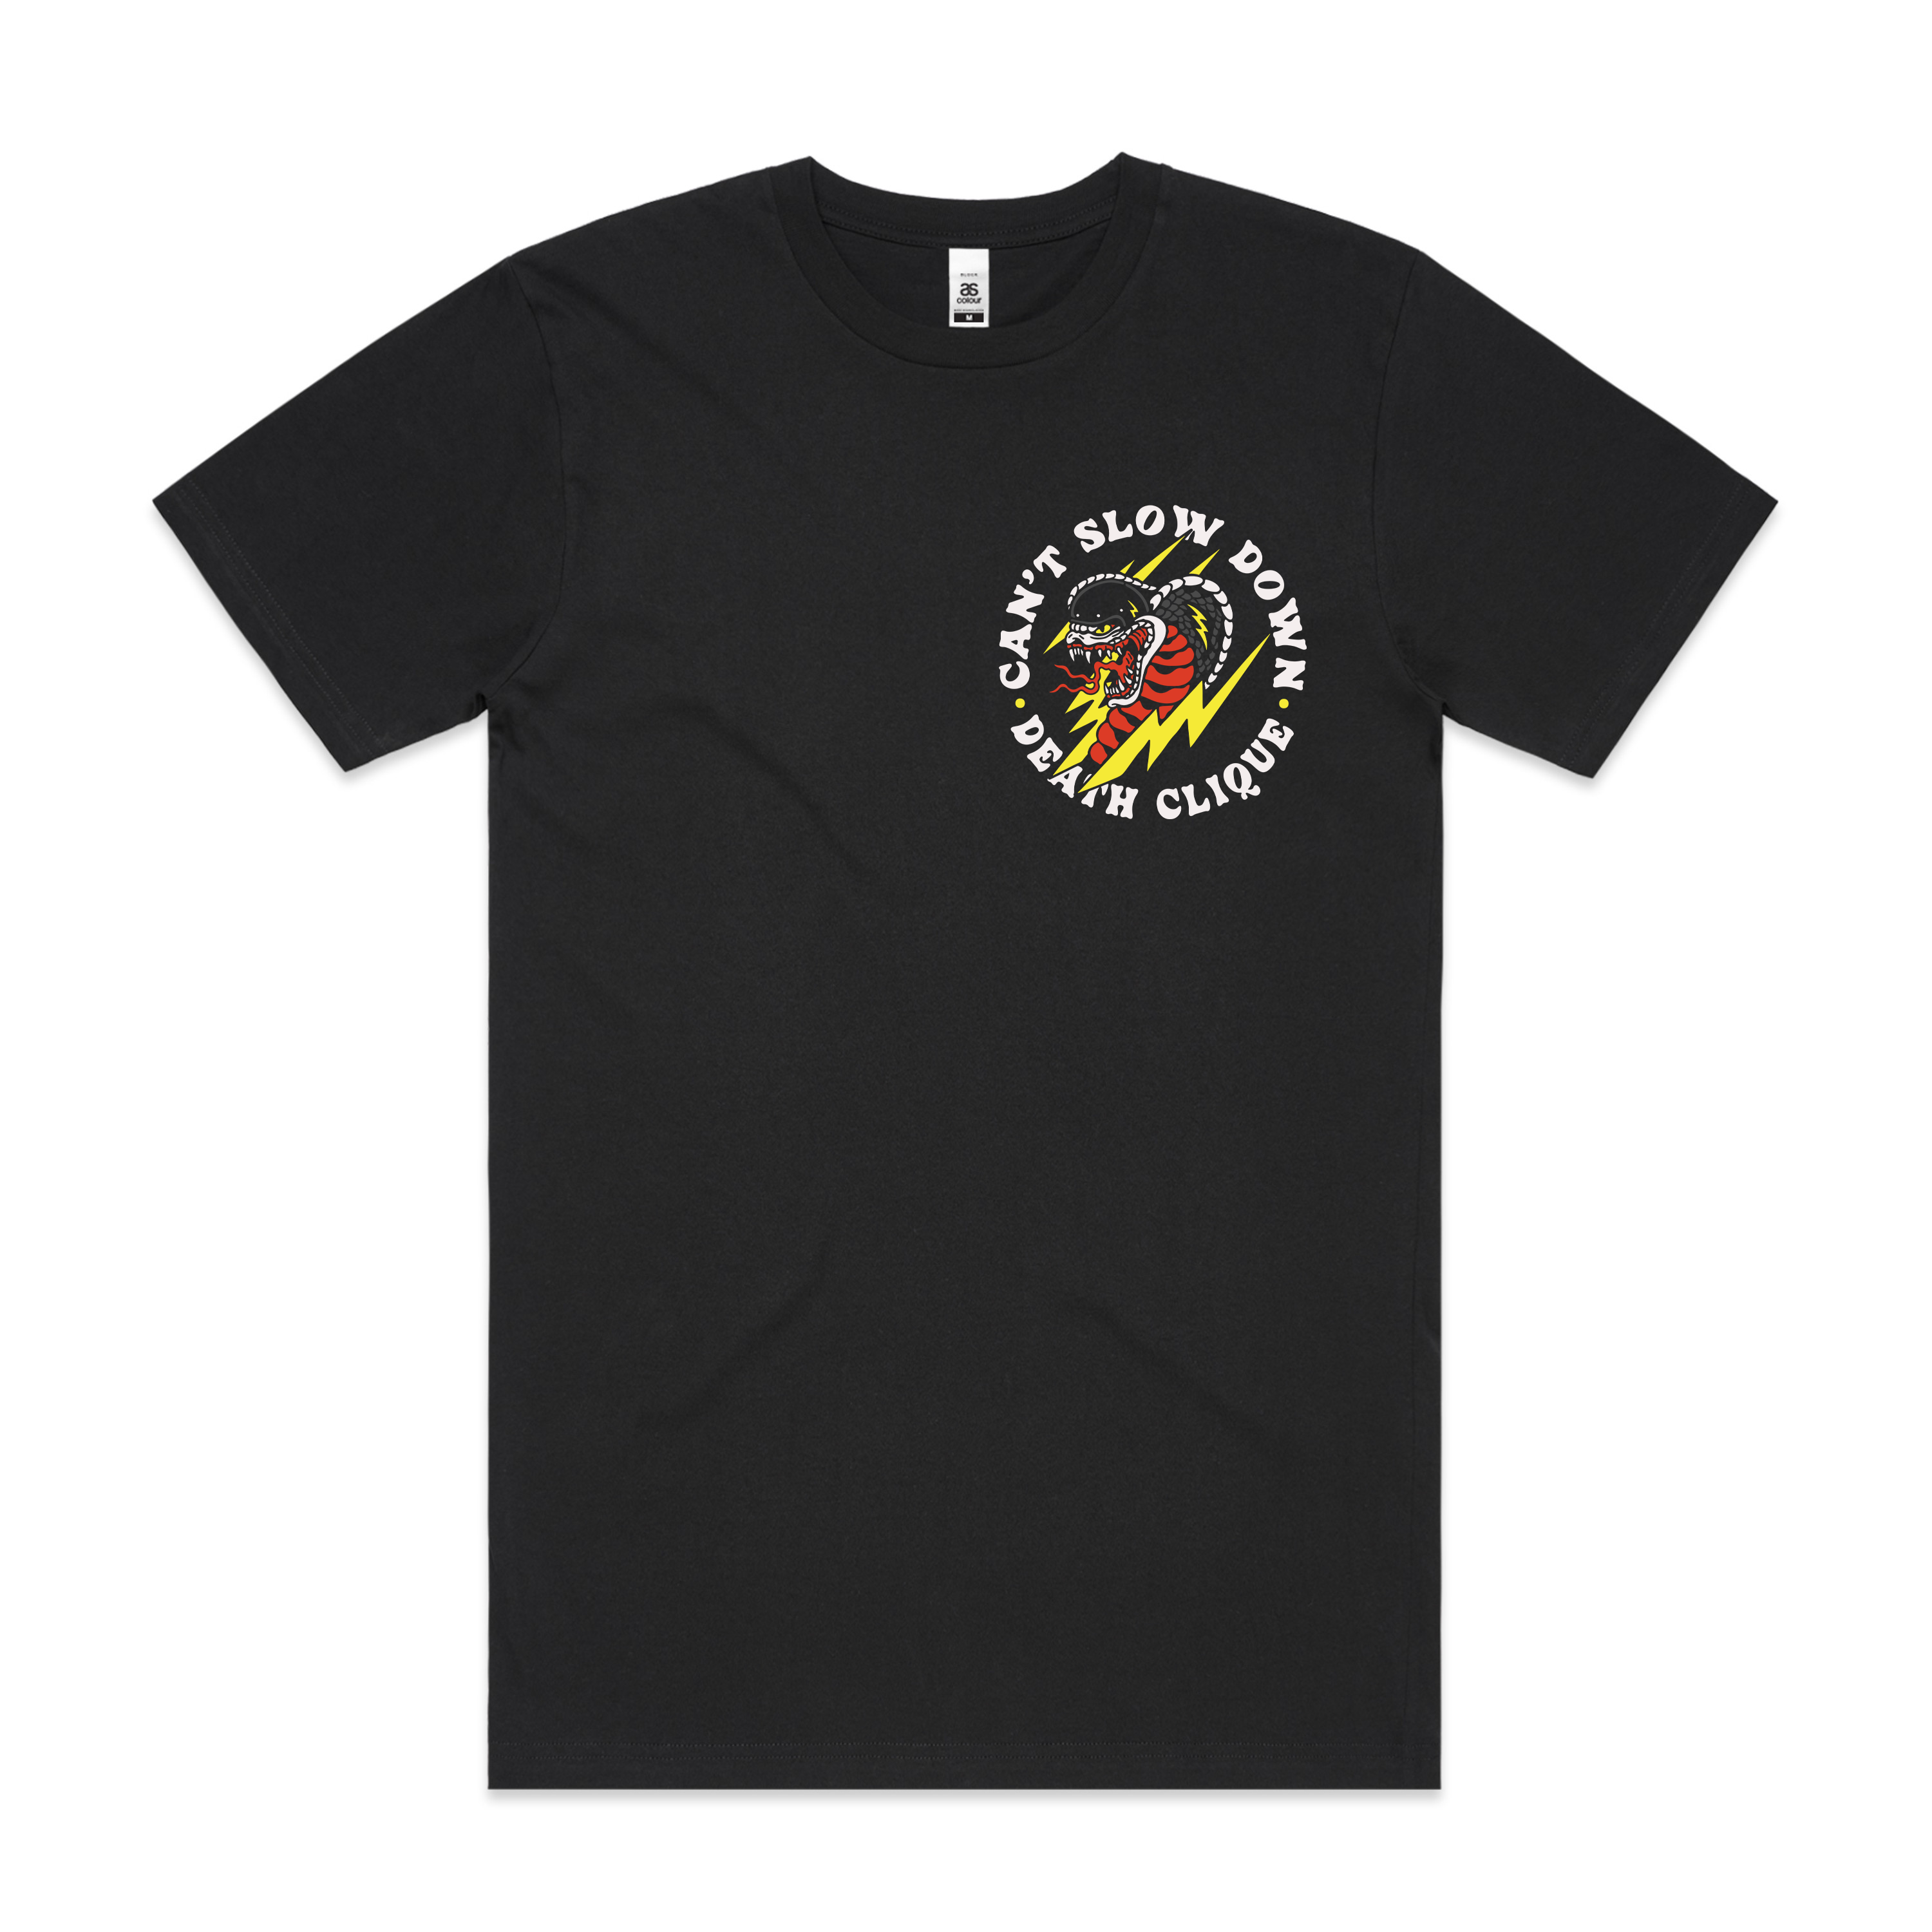 Can't Slow Down - Black Tee